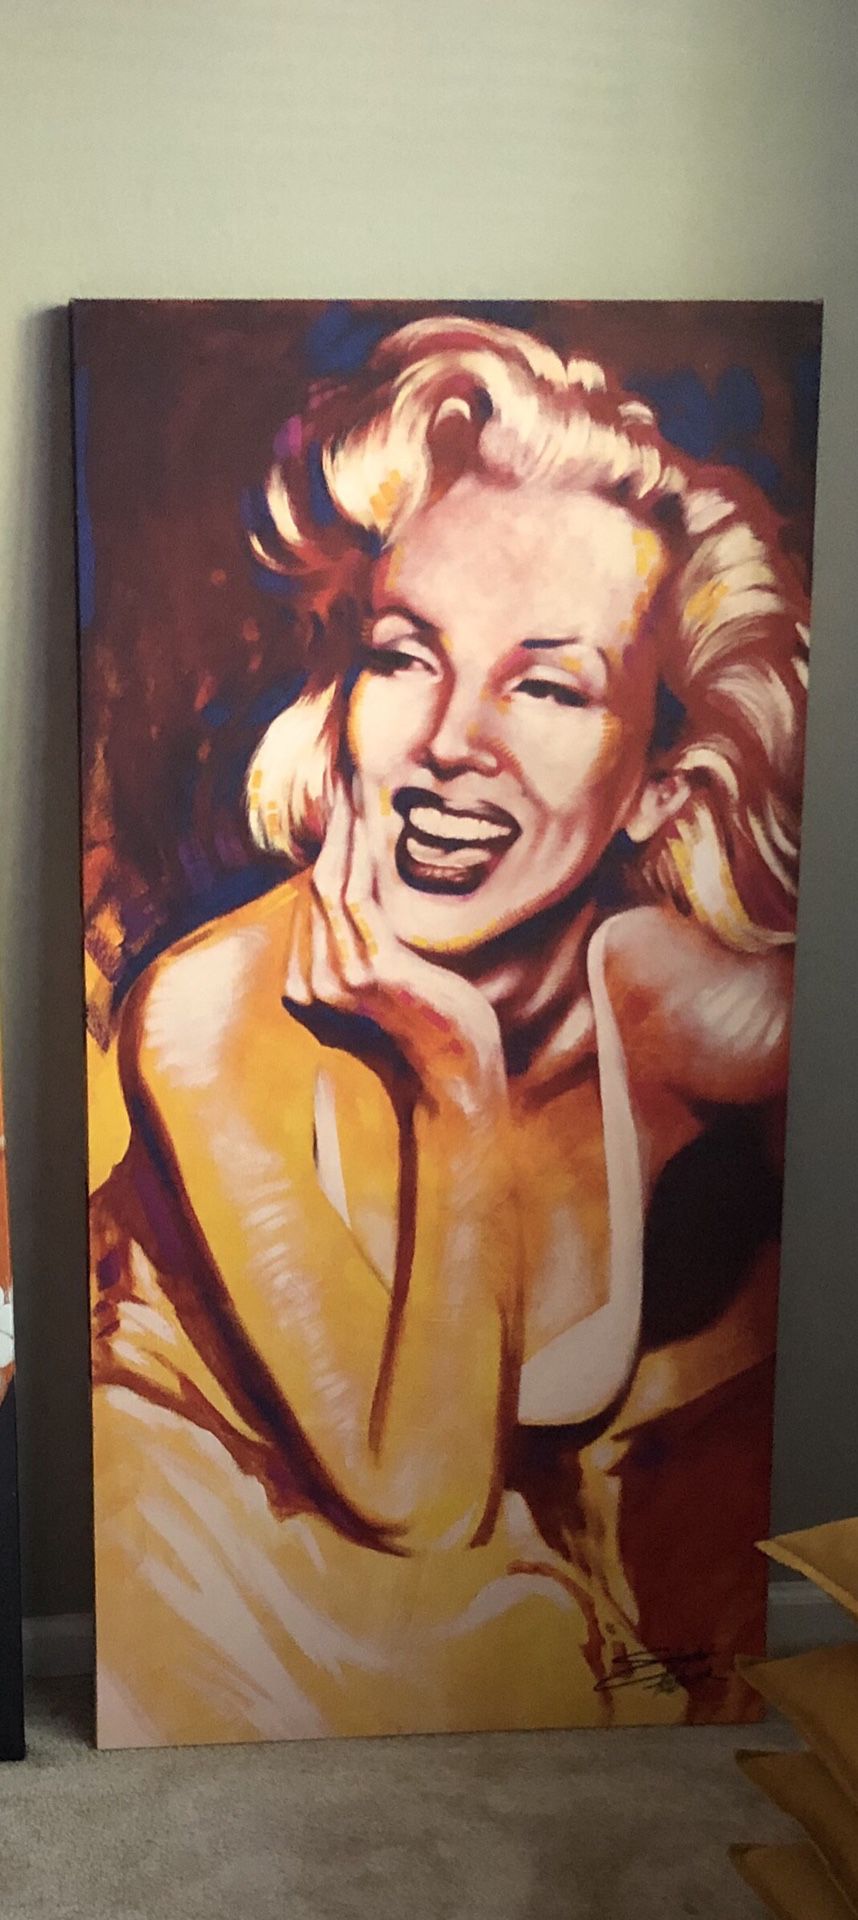 57.5” by 26” Large Marilyn Monroe Canvas Art $35